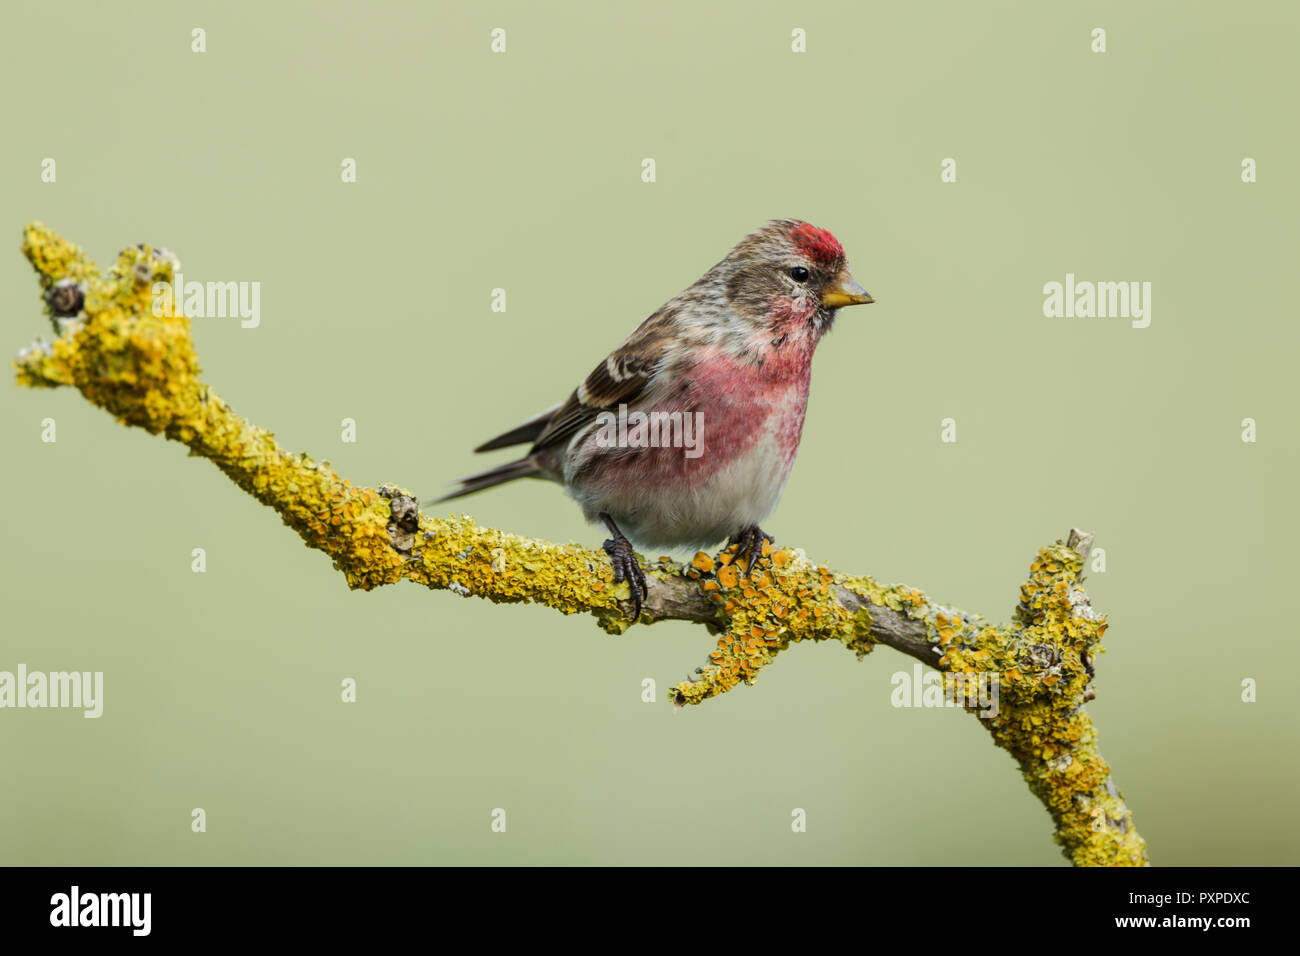 Common redpoll, Latin name Carduelis flammea, perched on a lichen covered twig, set against a pale green backgournd Stock Photo